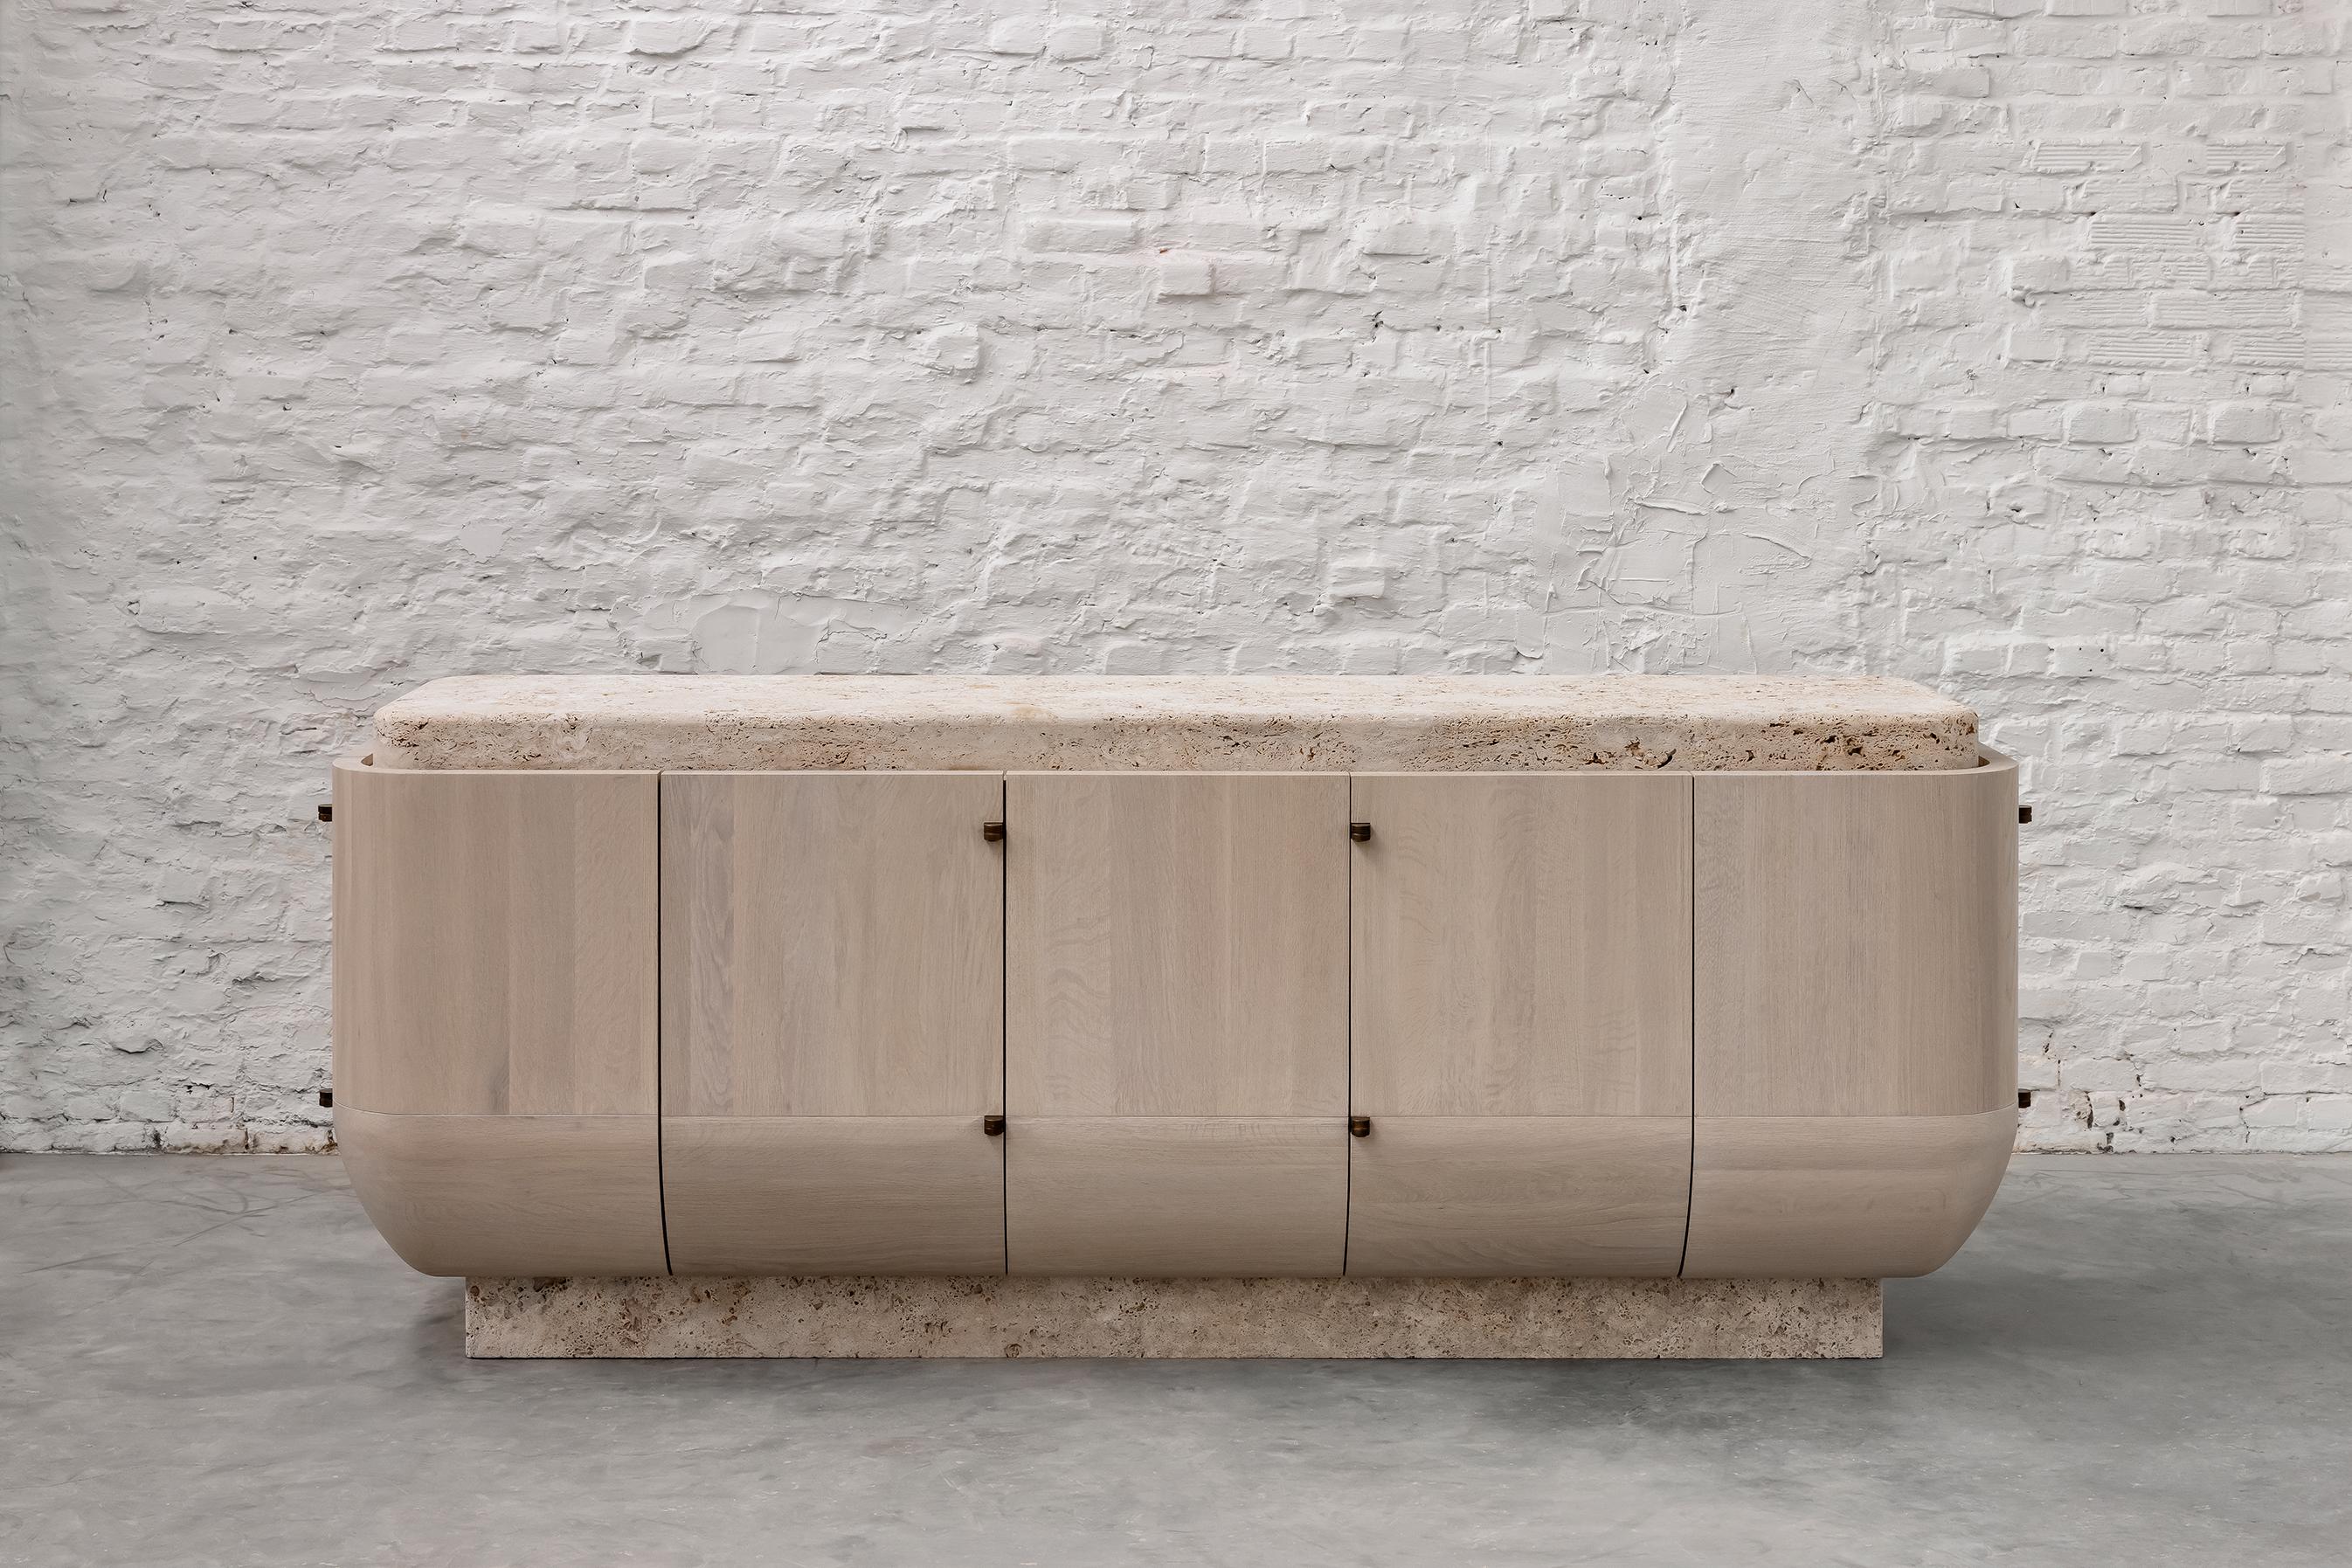 Yoma Console by Andy Kerstens.
Limited Edition of 20 
Dimensions: W 255 x D 70 x H 100 cm
Materials: Wood bleached and brushed European oak, solid + veneer
Metal solid brass with patinated bronze finish, Stone cross-cut open pore travertino